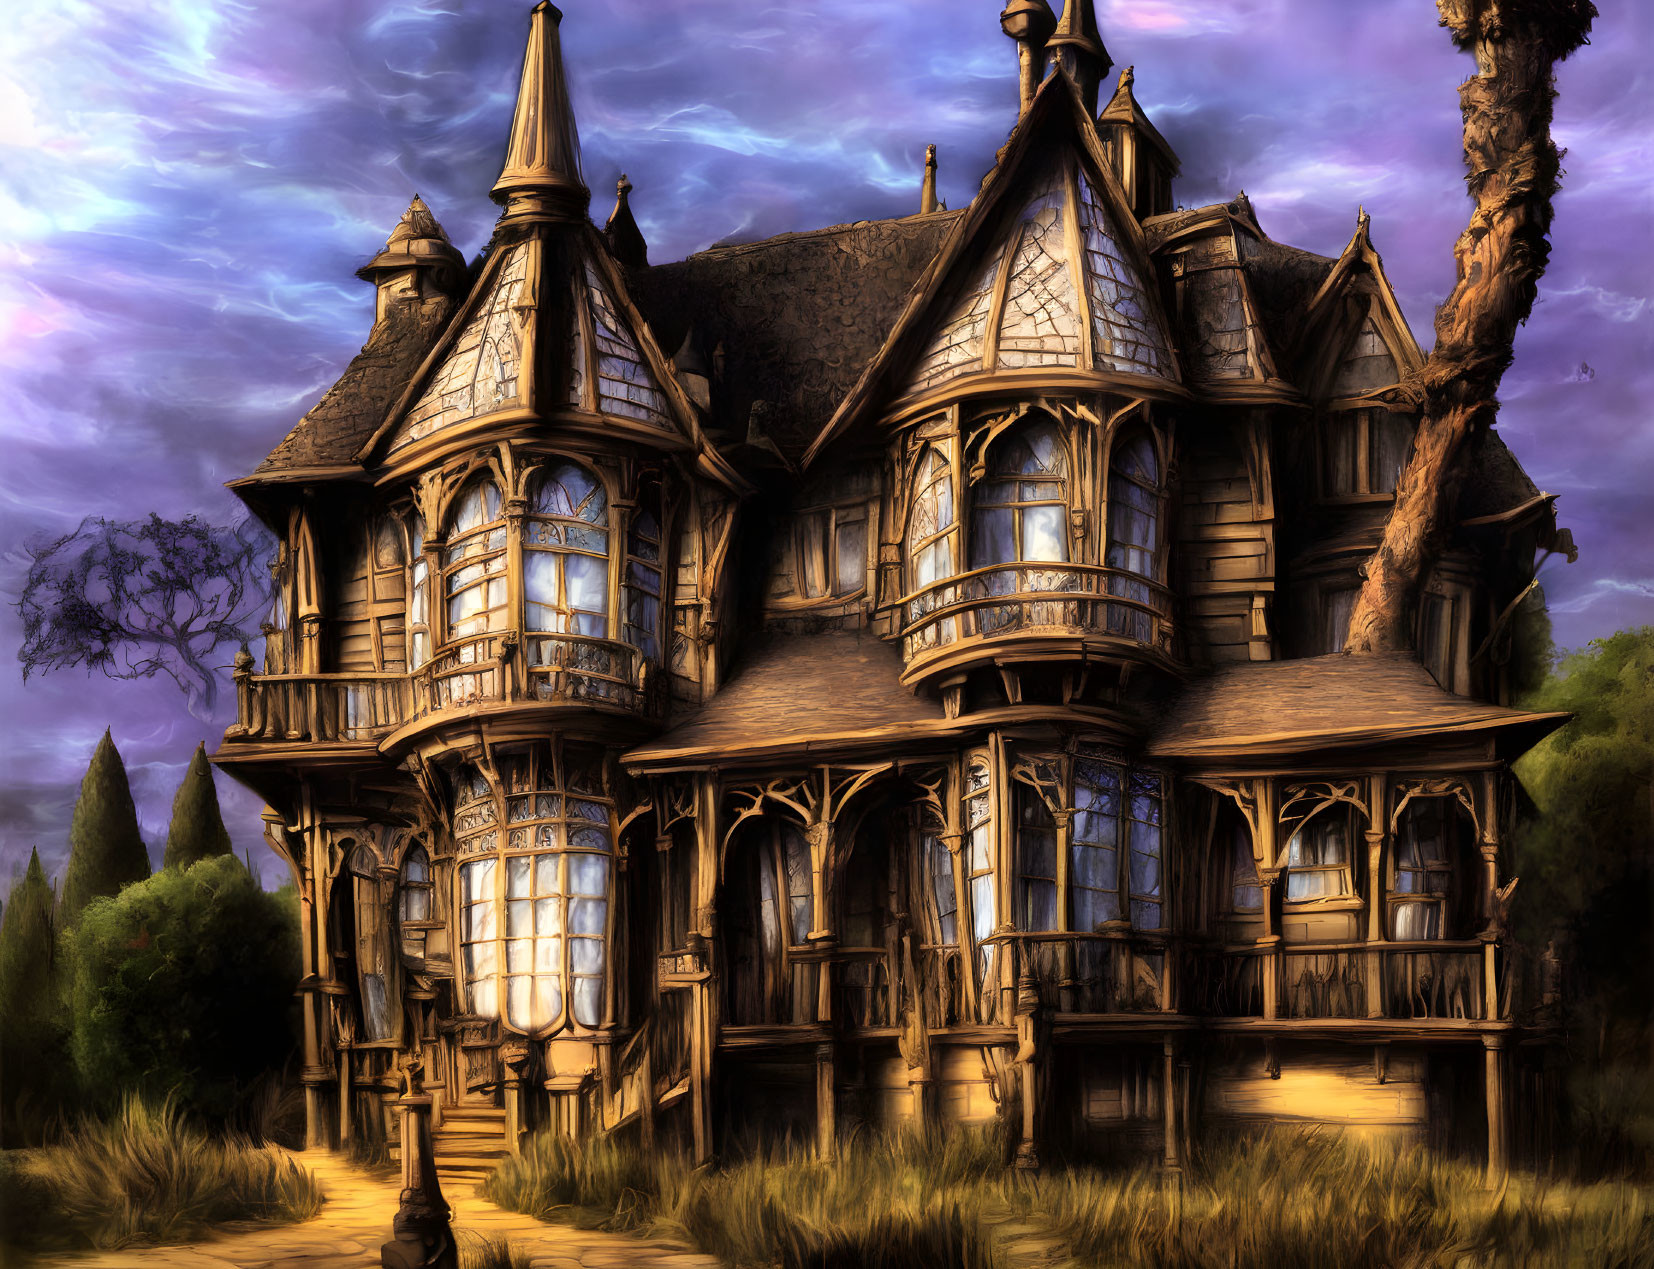 Victorian-style house with multiple gables and ornate wooden trimmings in a dusky landscape